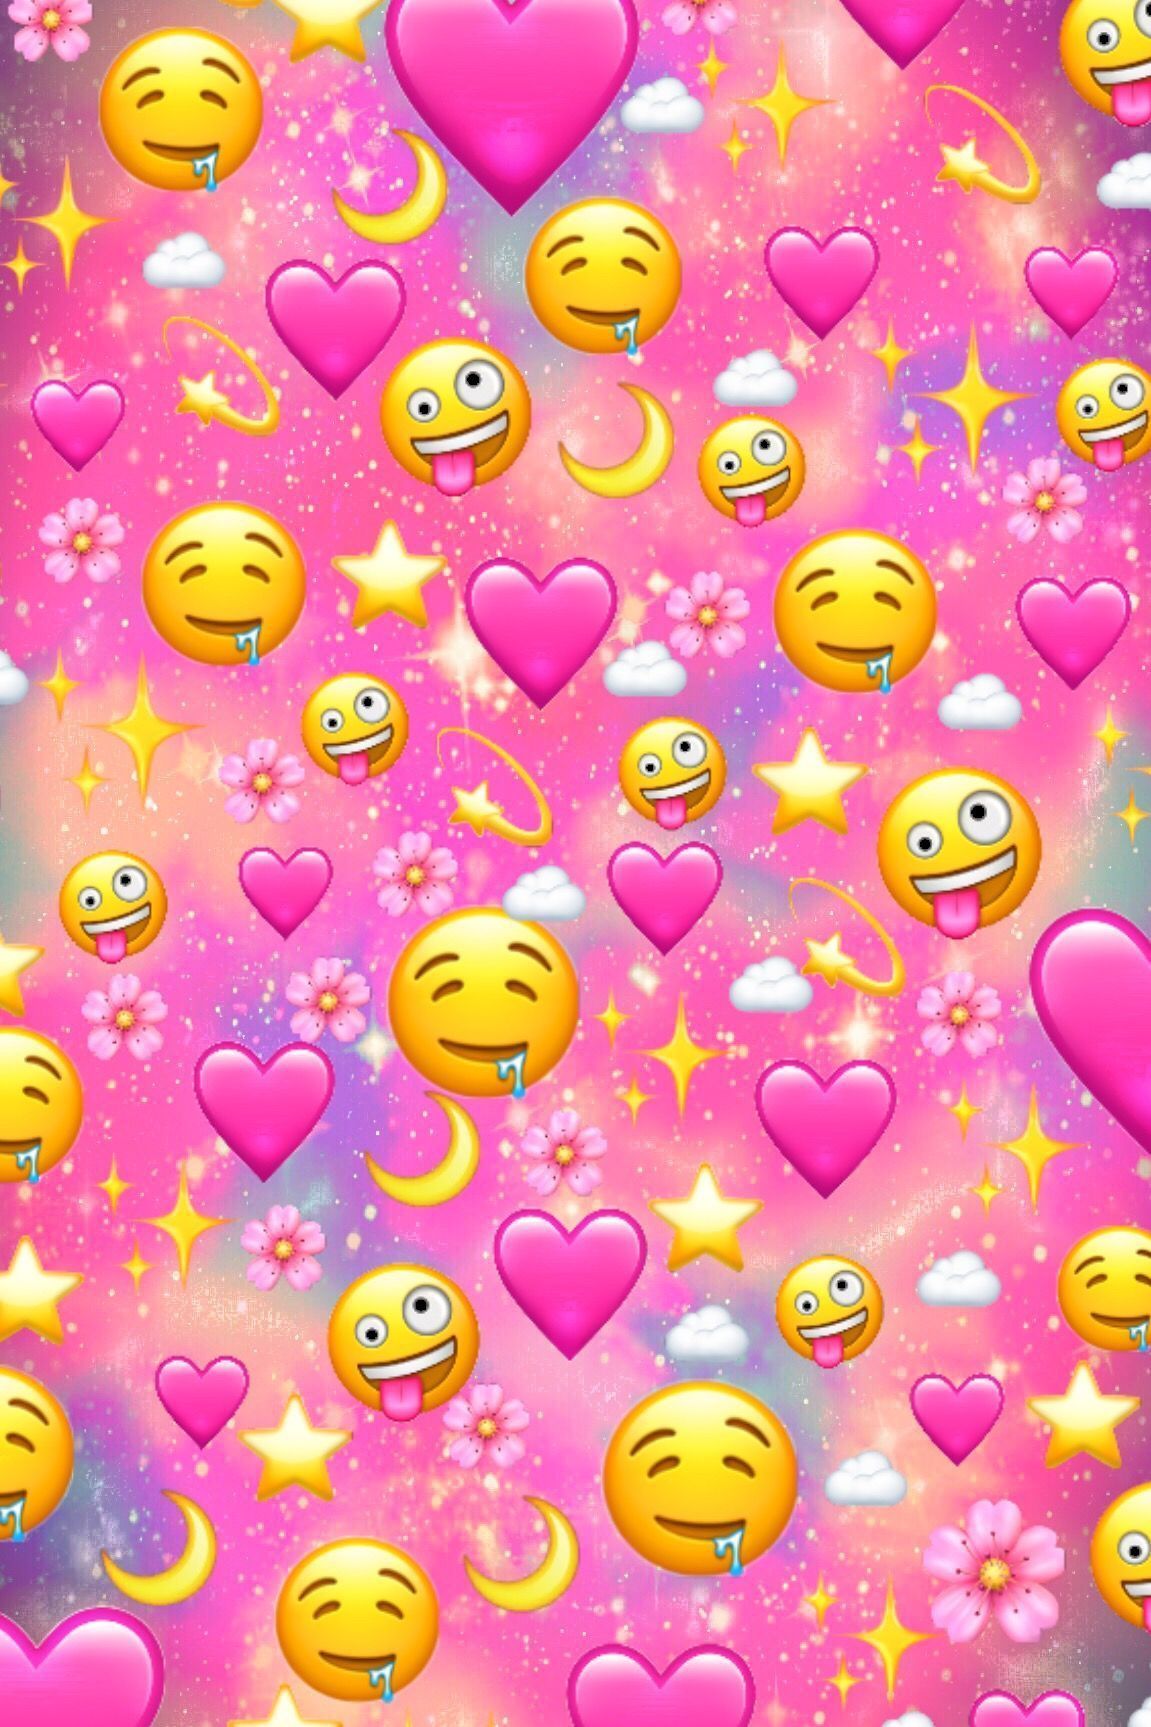 This is a picture of a pink emoji wallpaper with hearts, stars, and clouds. - Emoji